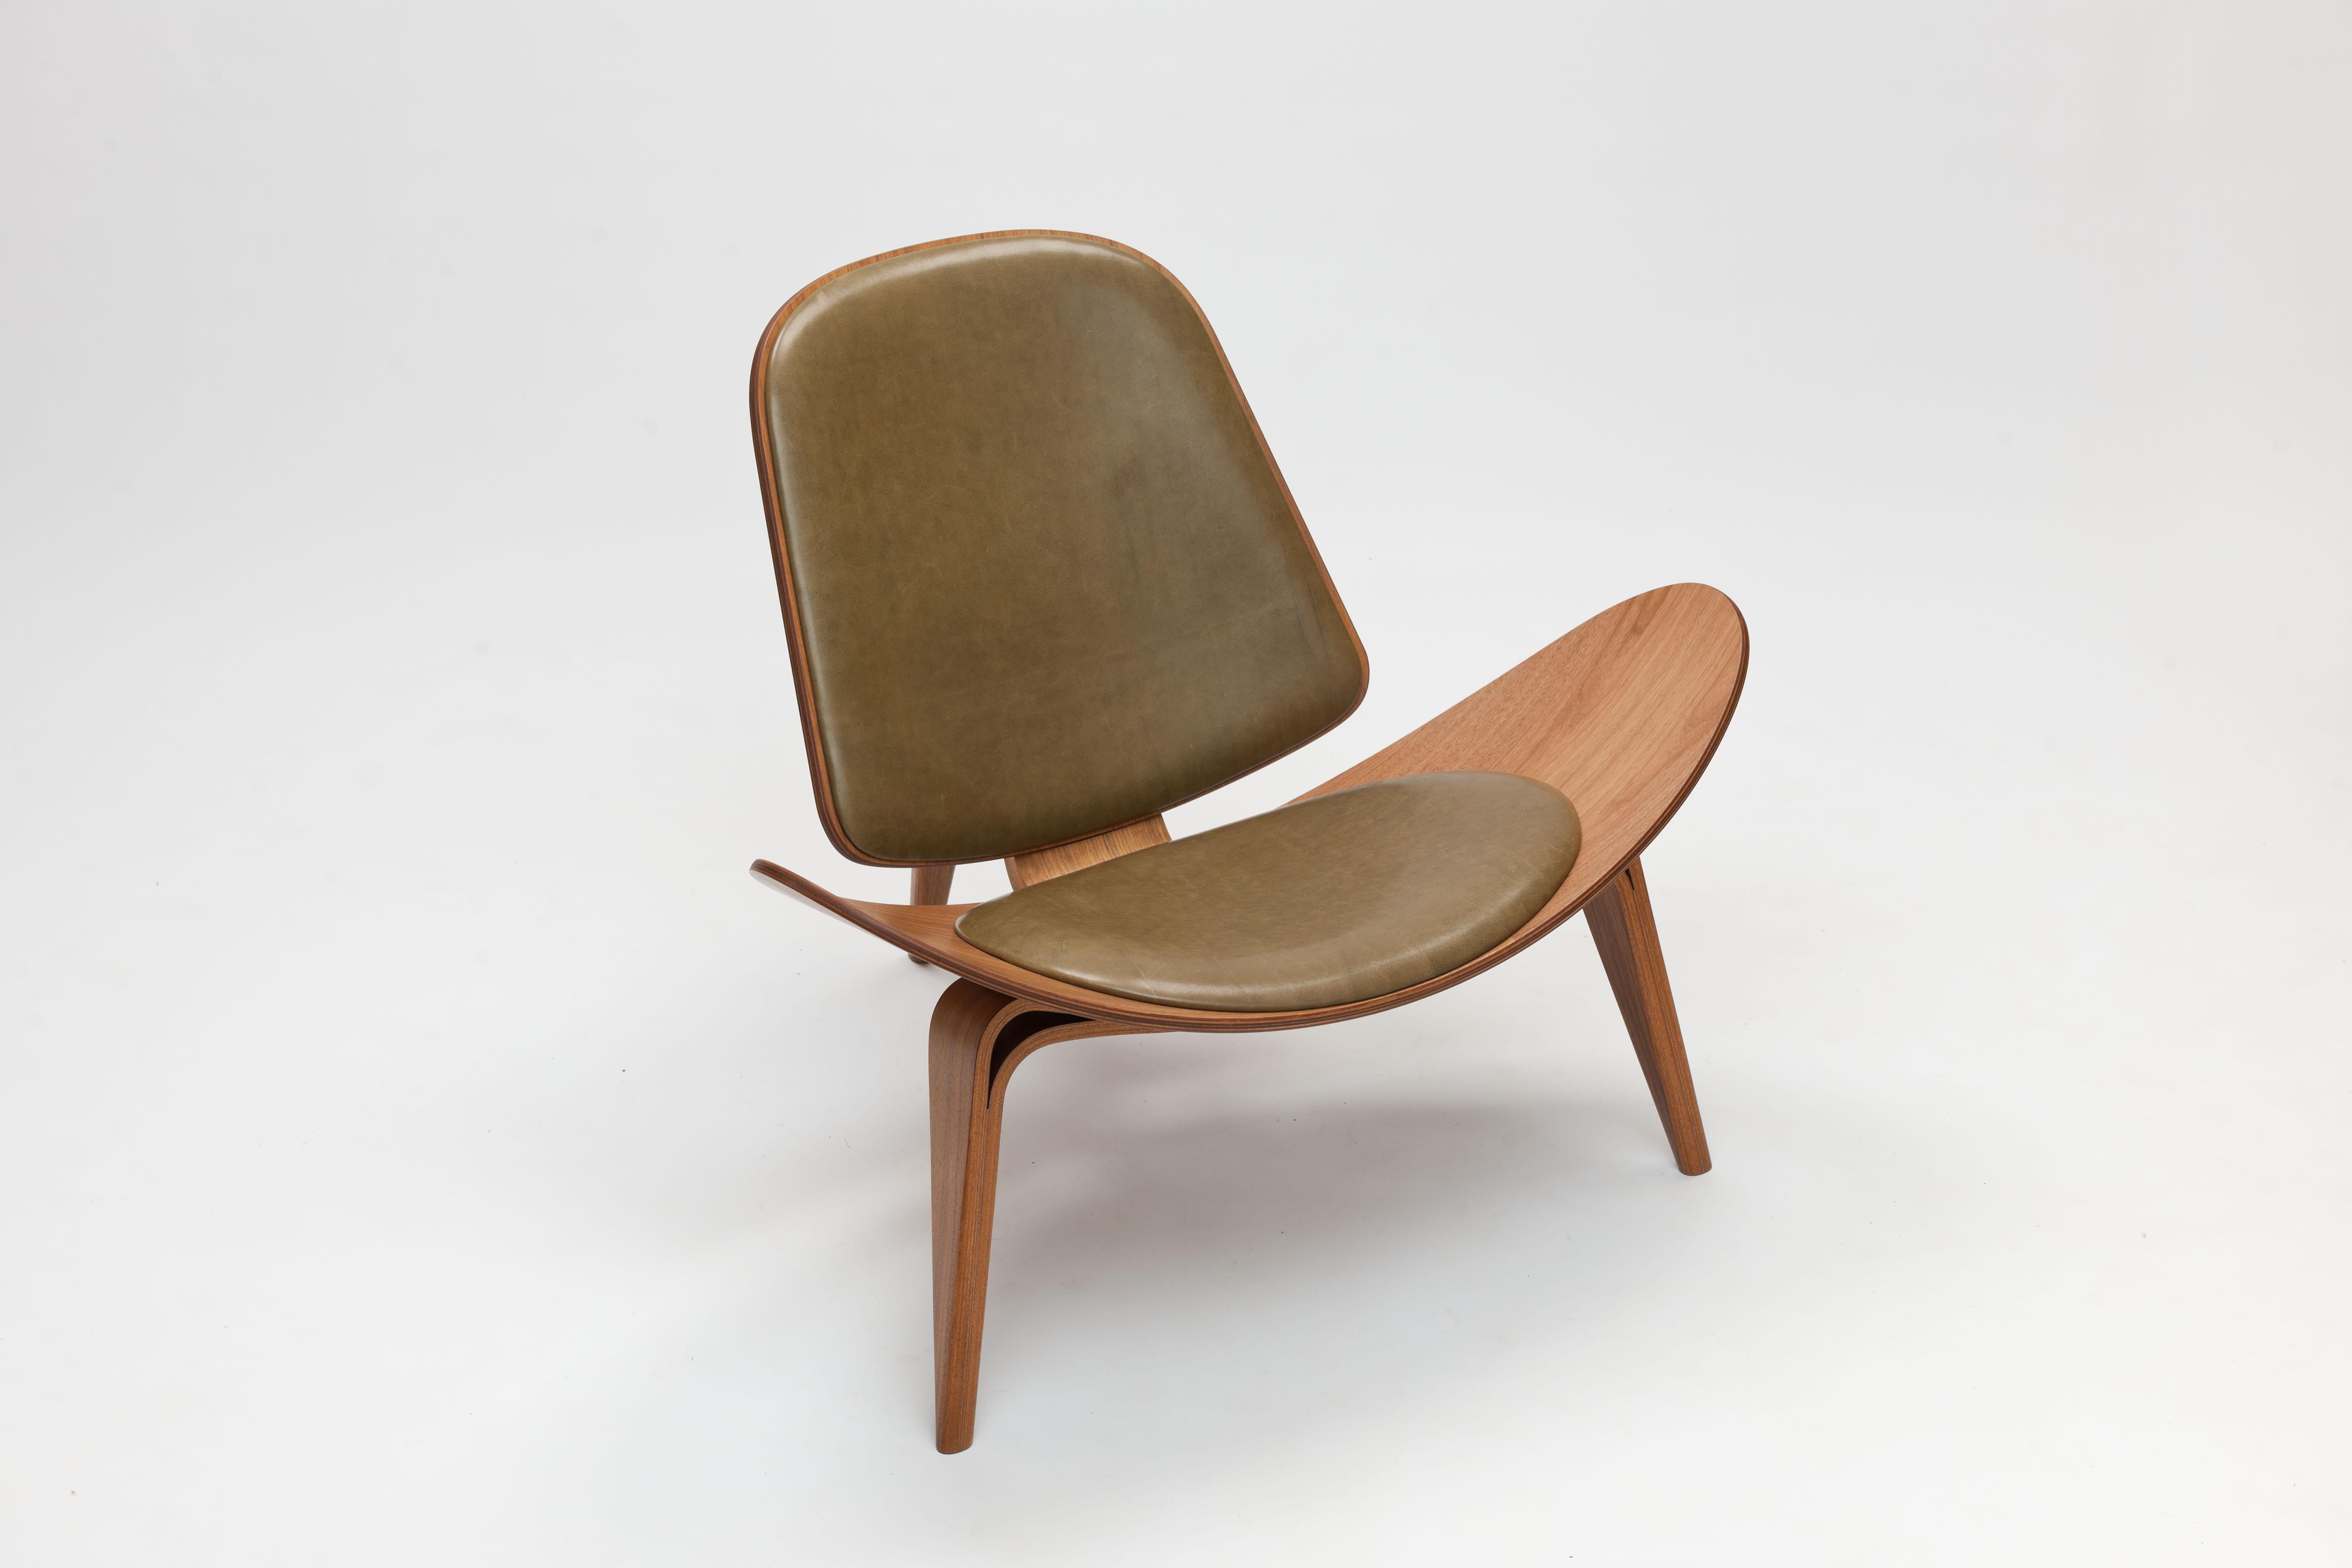 Bespoke green leather and walnut CH07 / Shell Chair by Danish designer Hans Jørgen Wegner for Carl Hansen & Son. This chair is from a recent production and is executed in bespoke leather upholstery in a very beautiful green aniline leather that